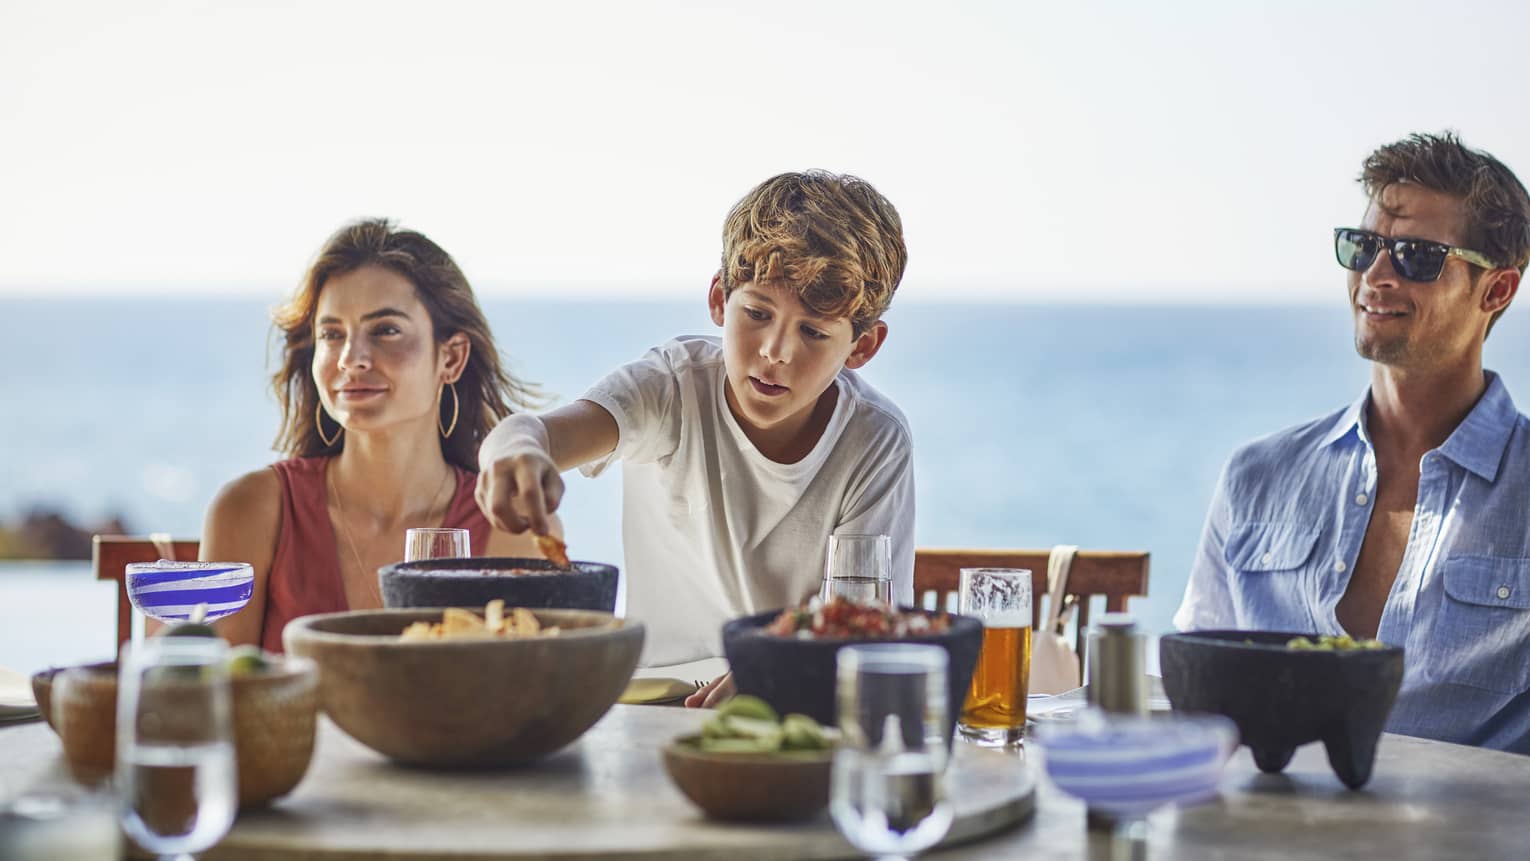 A young boy reaches for a chip bowl on table as a woman and man sit on either side, ocean in the background